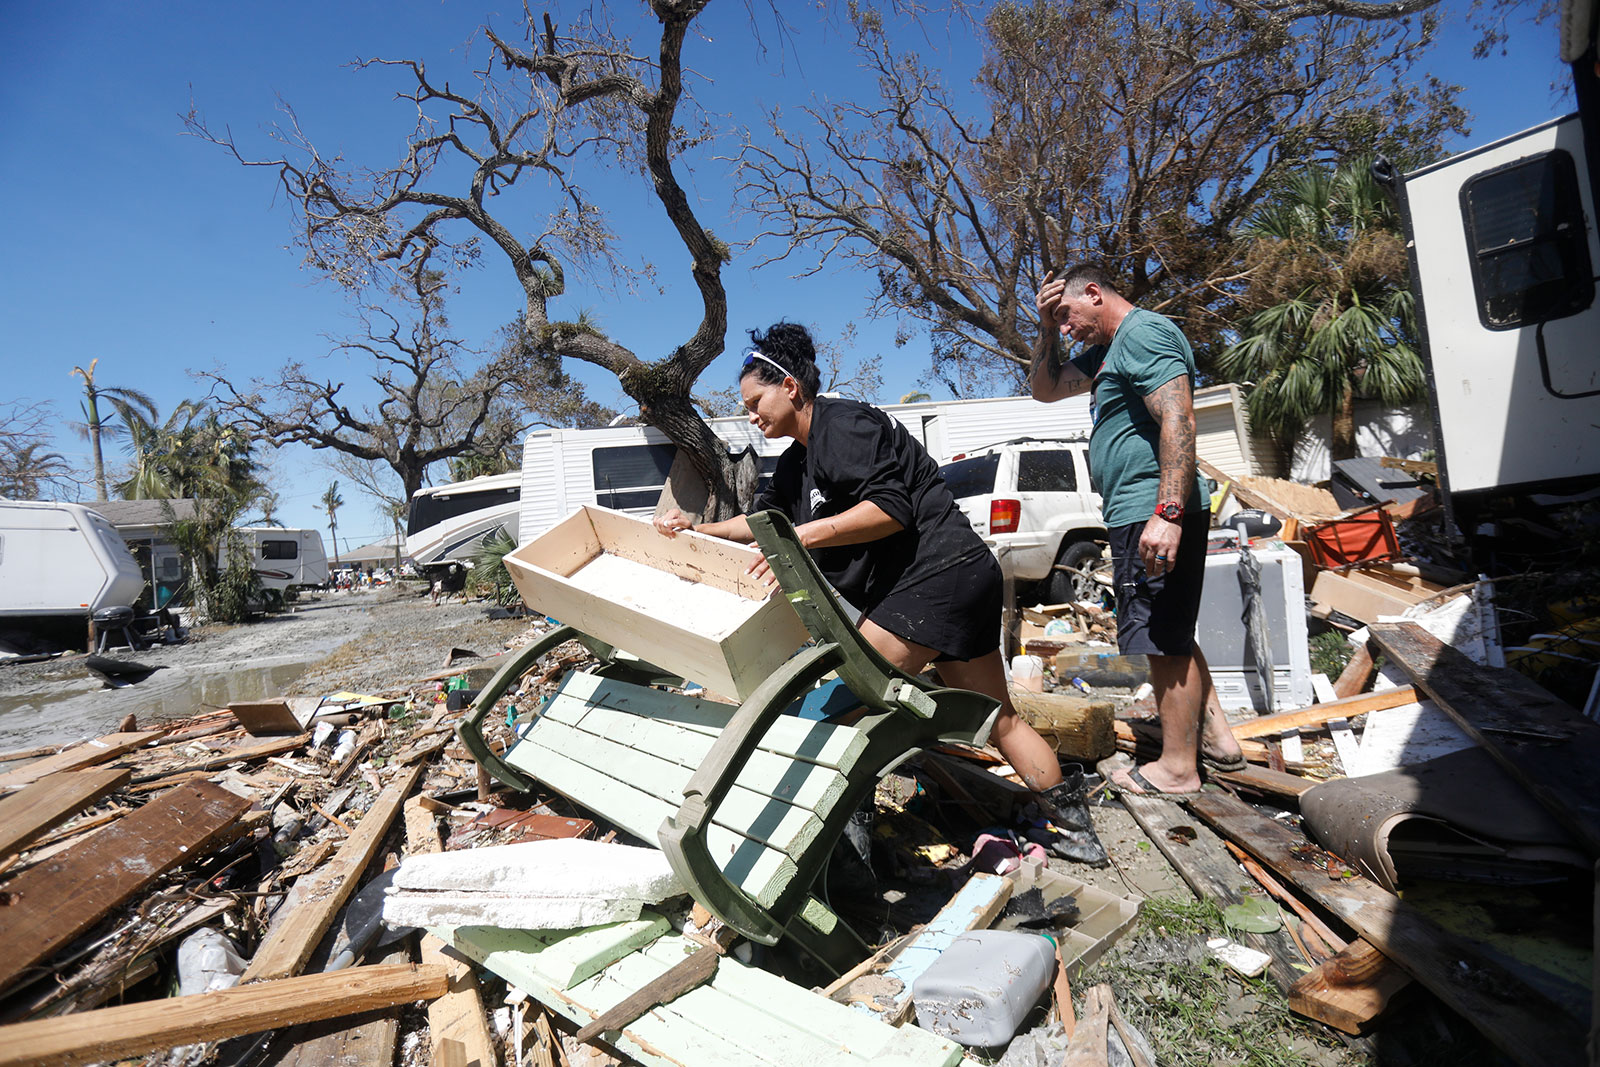 Betsy Hayward and her husband John Riili try to salvage their belongings from their RV mobile home in the Port Carlos Cove community located across from Fort Myers Beach on September 30. 